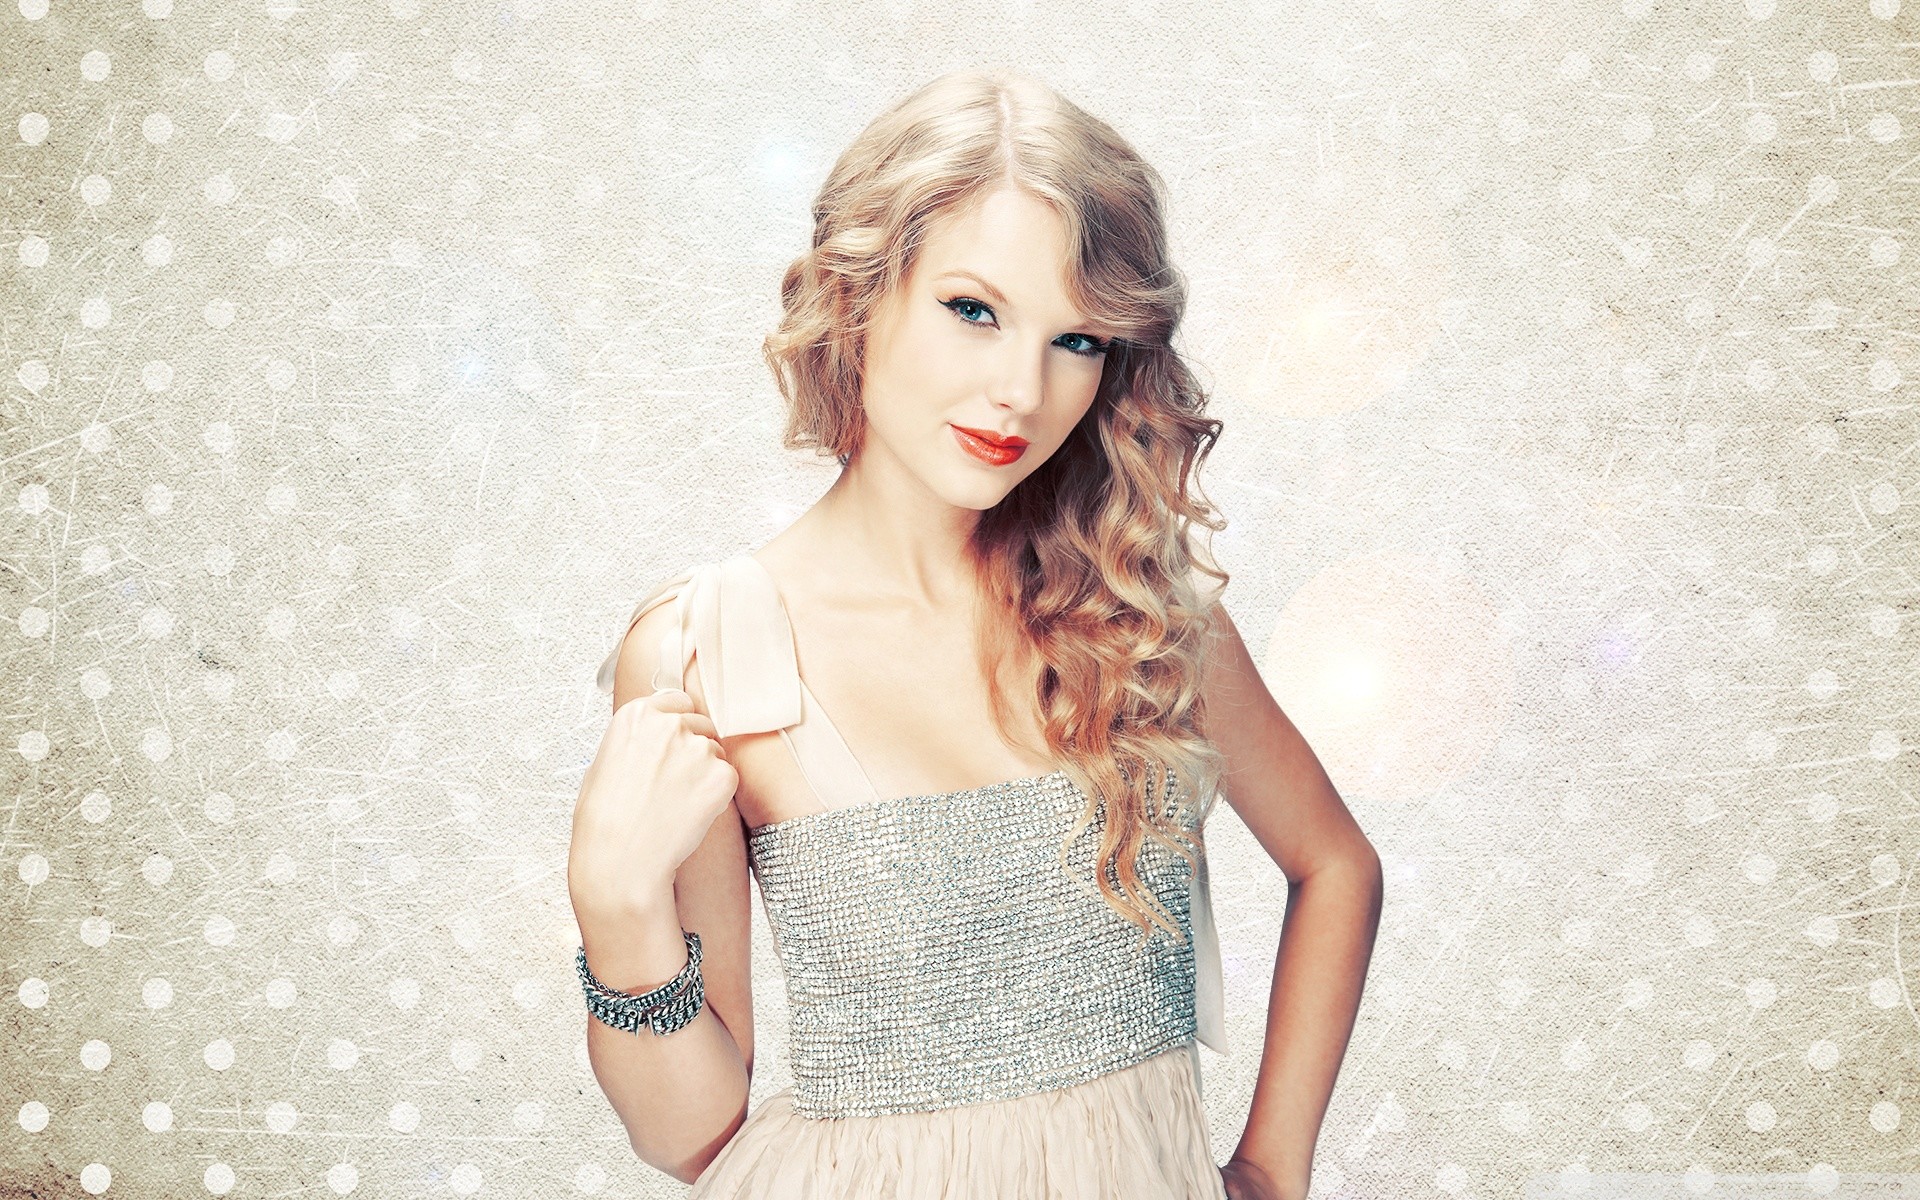 1920x1200 Top Taylor Swift Desktop Wallpapers, iPhone Wallpapers & More for .